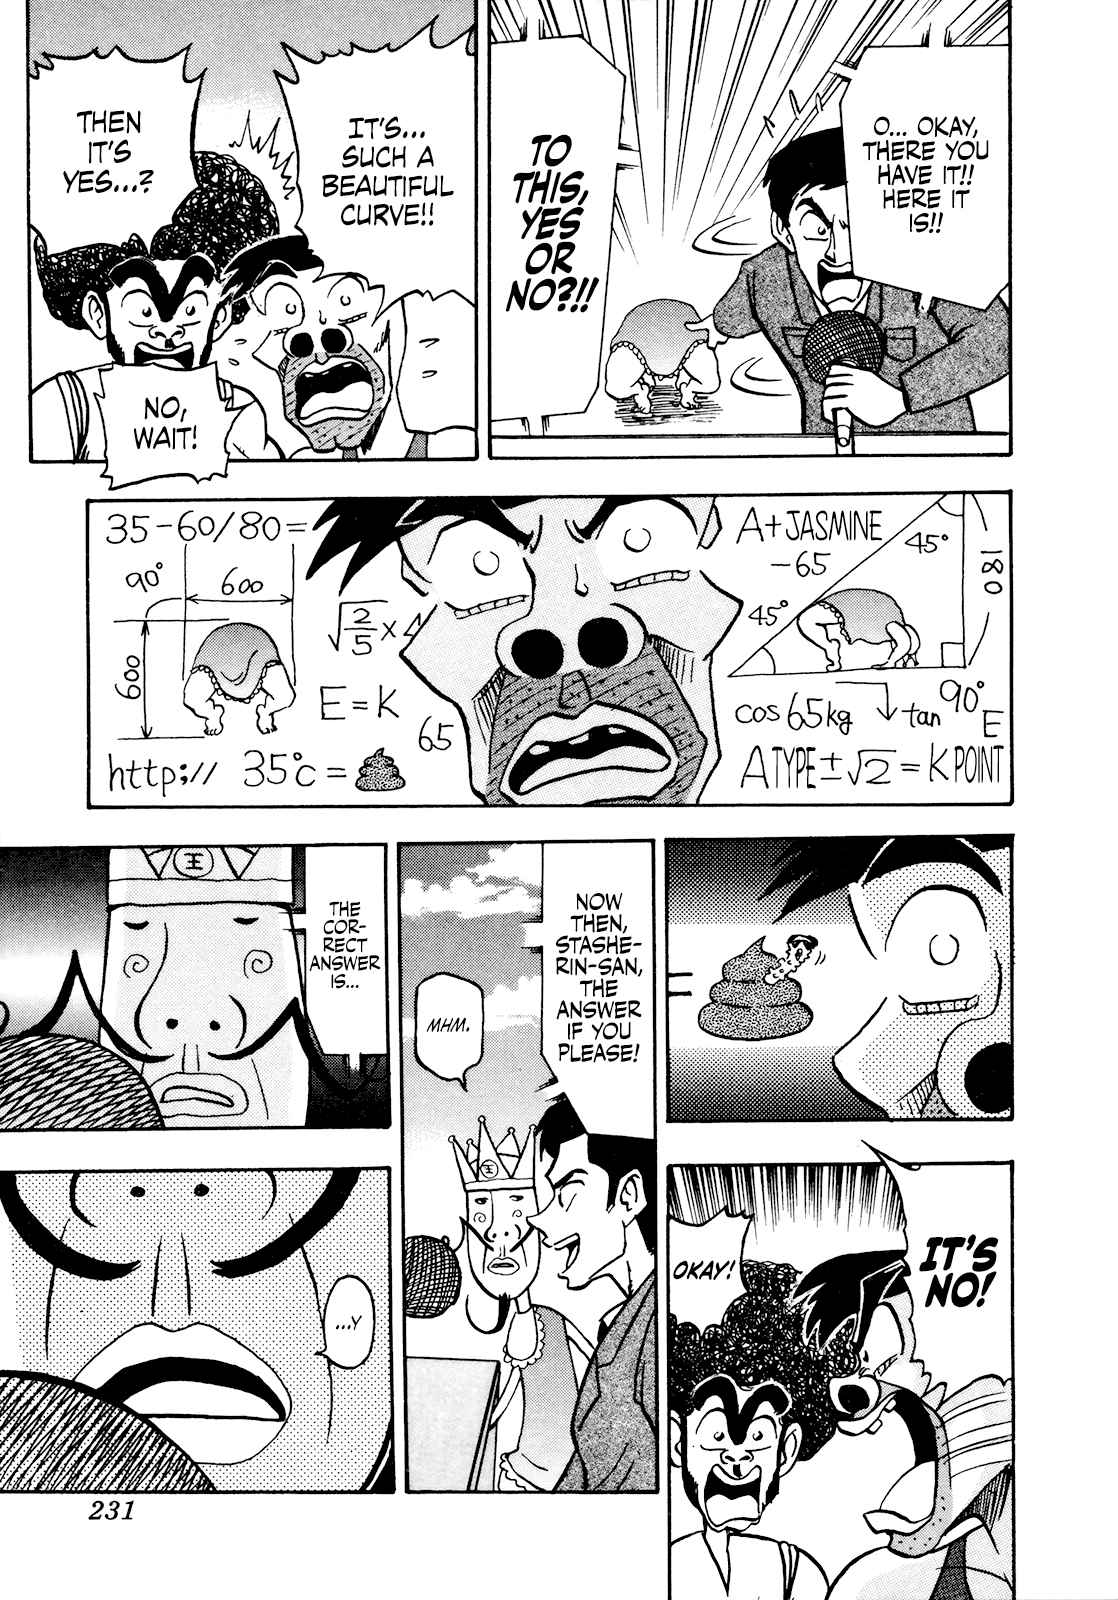 Seikimatsu Leader Den Takeshi! Vol. 3 Ch. 48 The Curtain Opens on the Mustachelympics!!